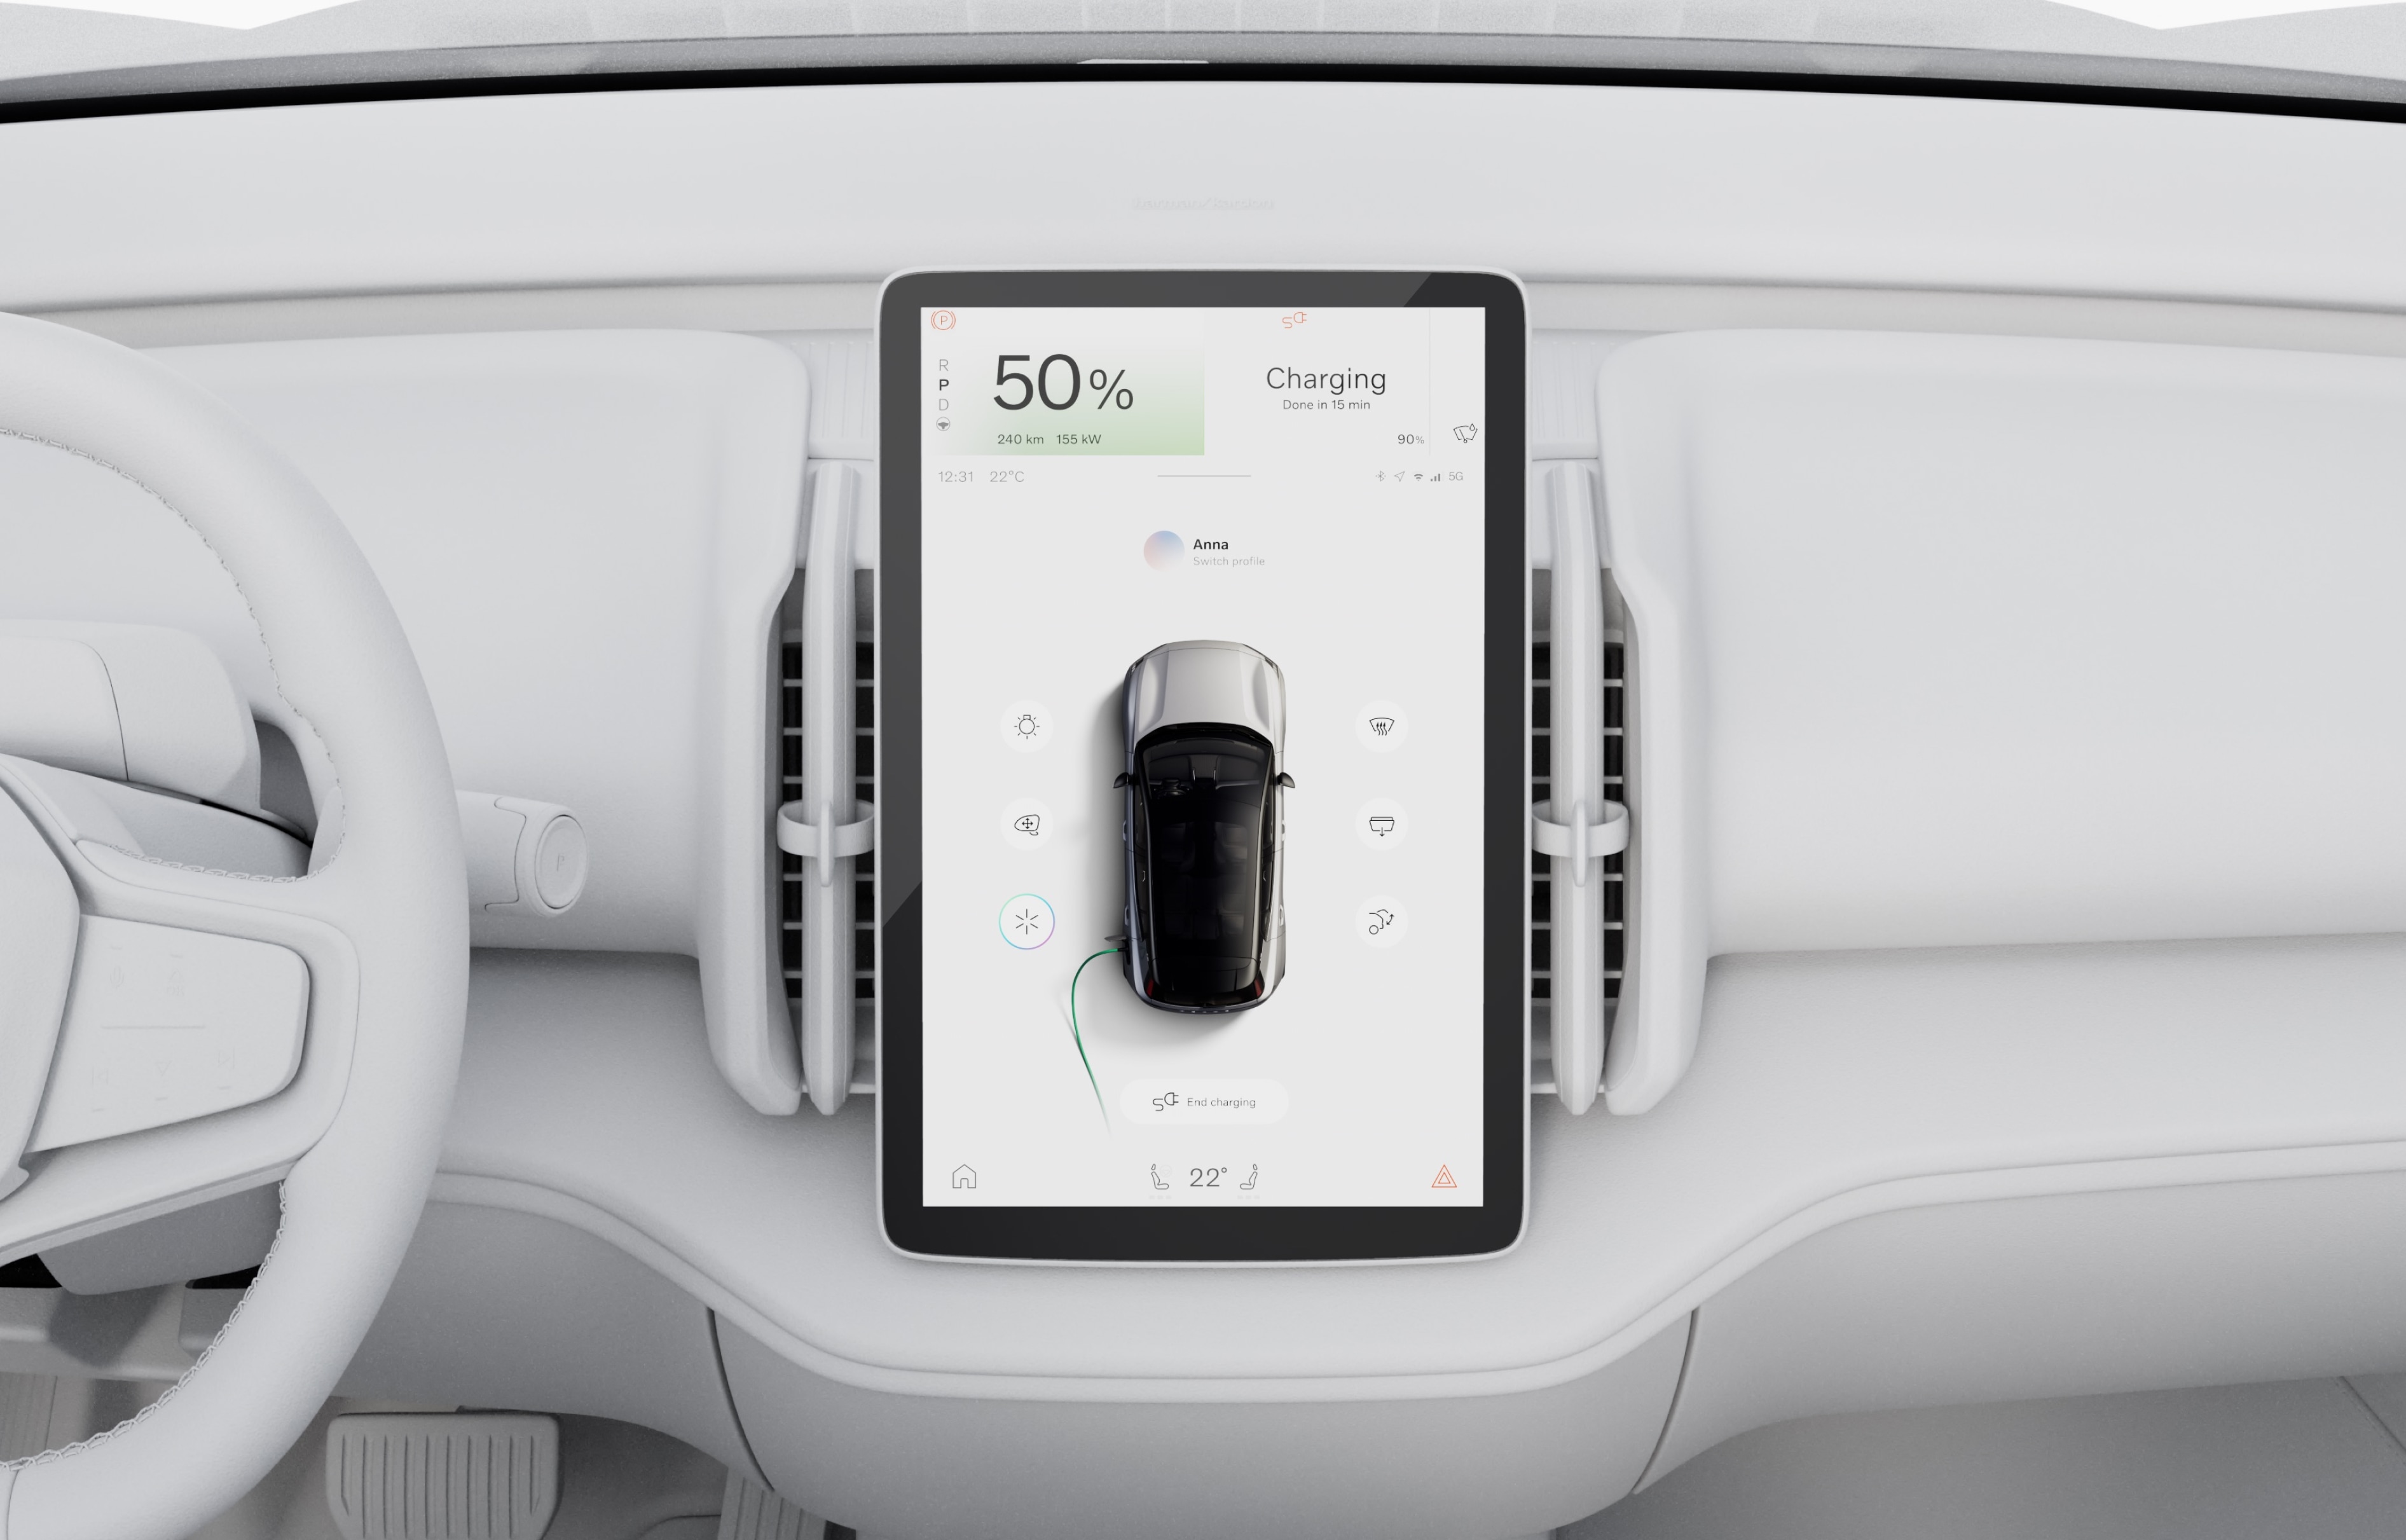 Image of the EX30's high-definition 12.3-inch touchscreen tablet-style centre display showing the rapid charging.